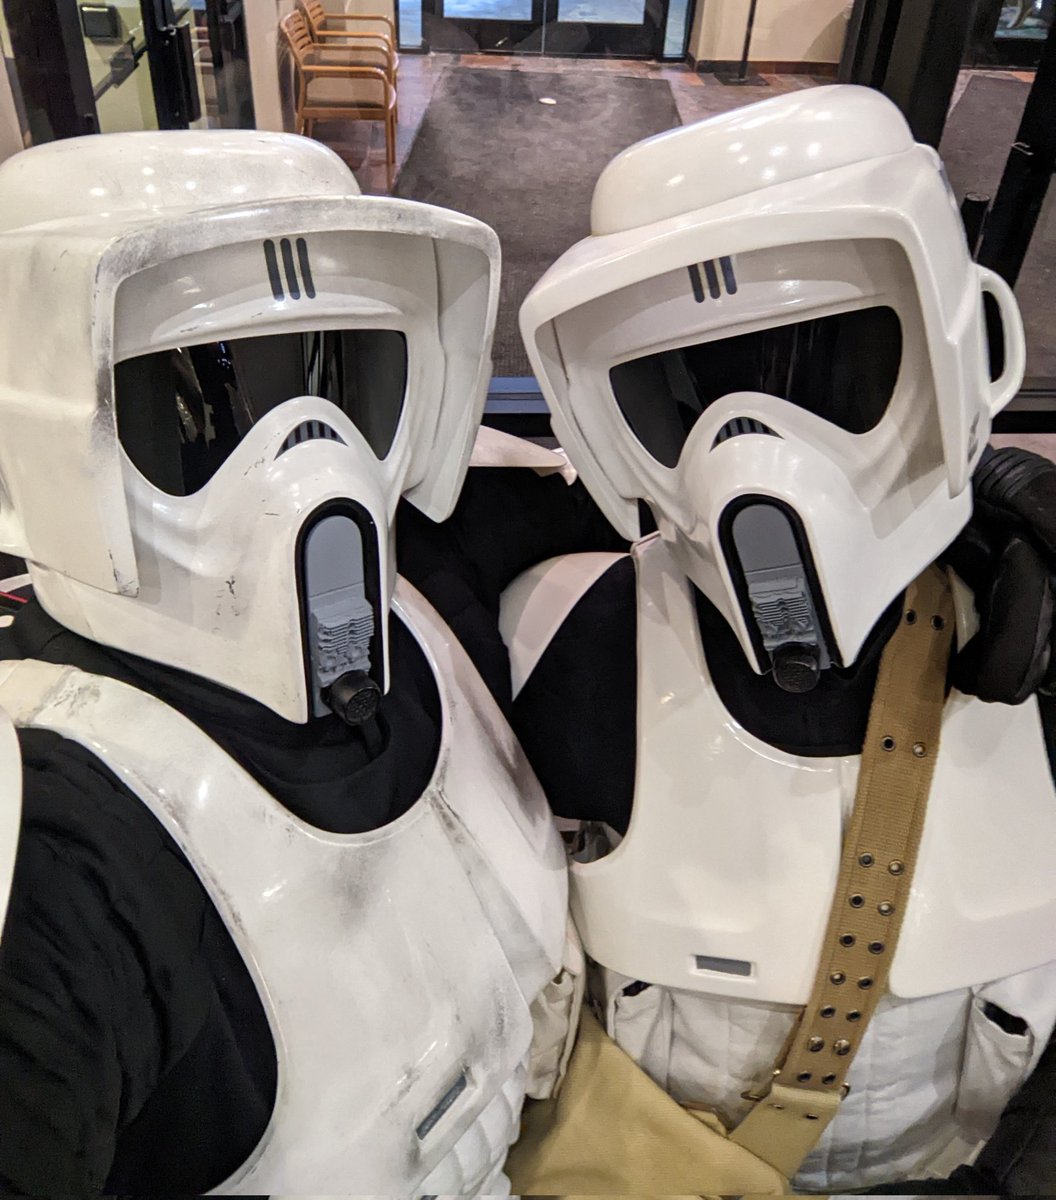 Us Scouts gotta stick together! 🏍️💨🏍️💨

#scouttrooper #501st #trooping #starwars